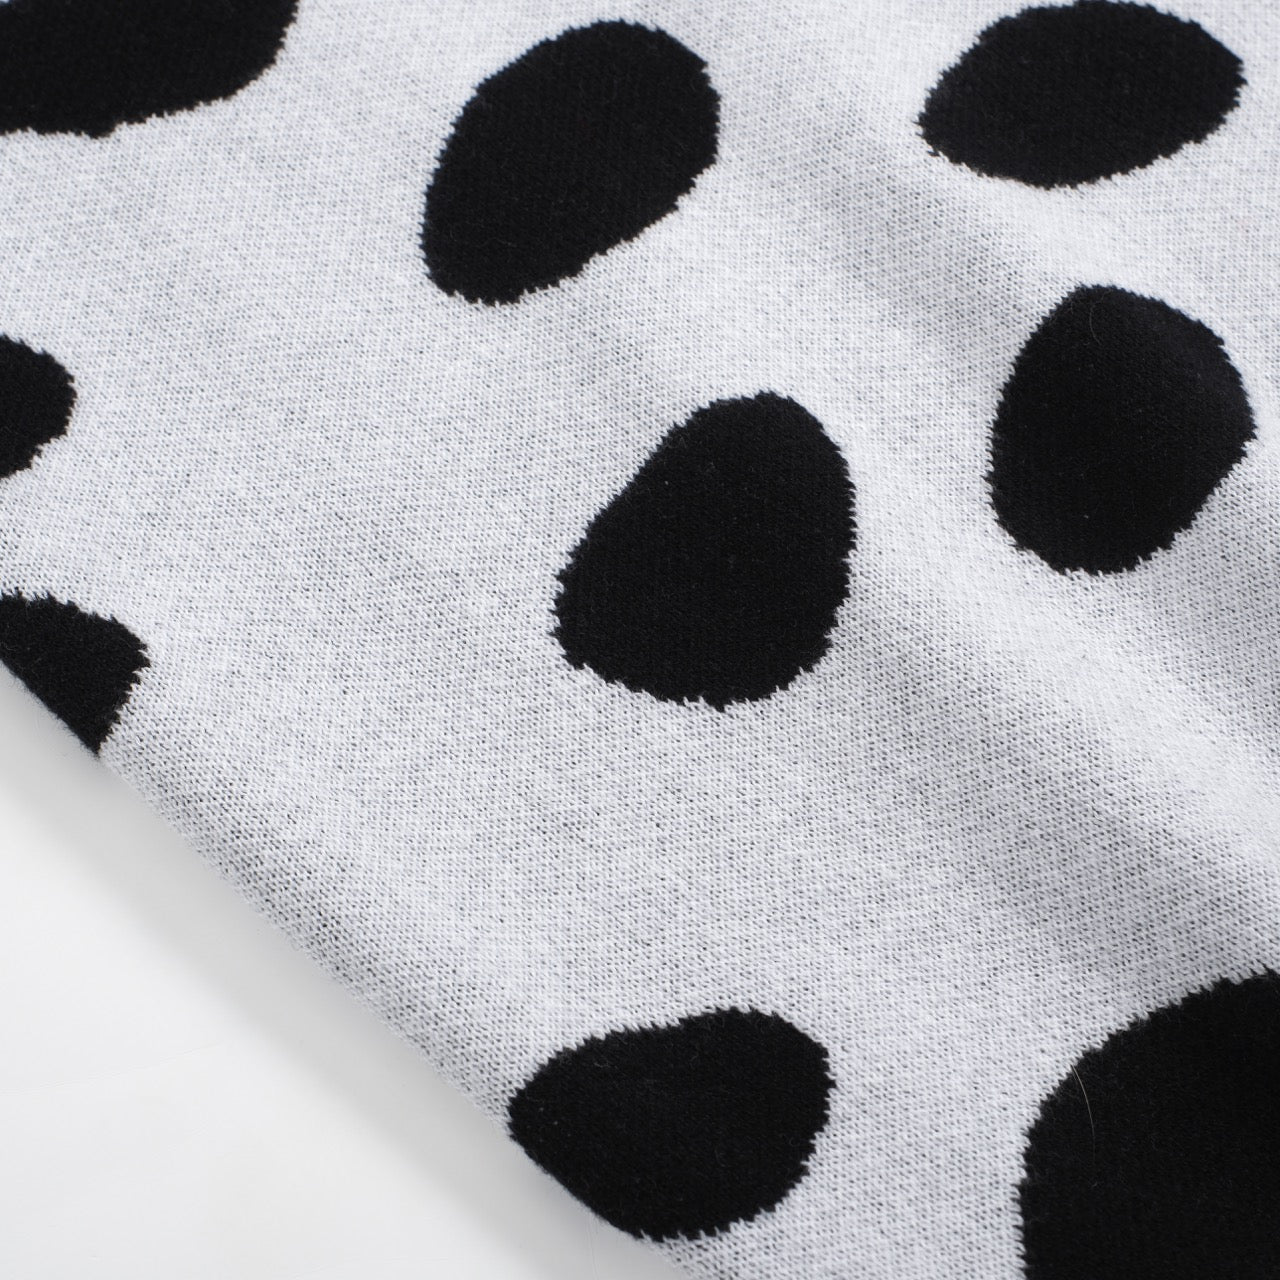 Men's White Knitted Polo Shirts With Black Dot